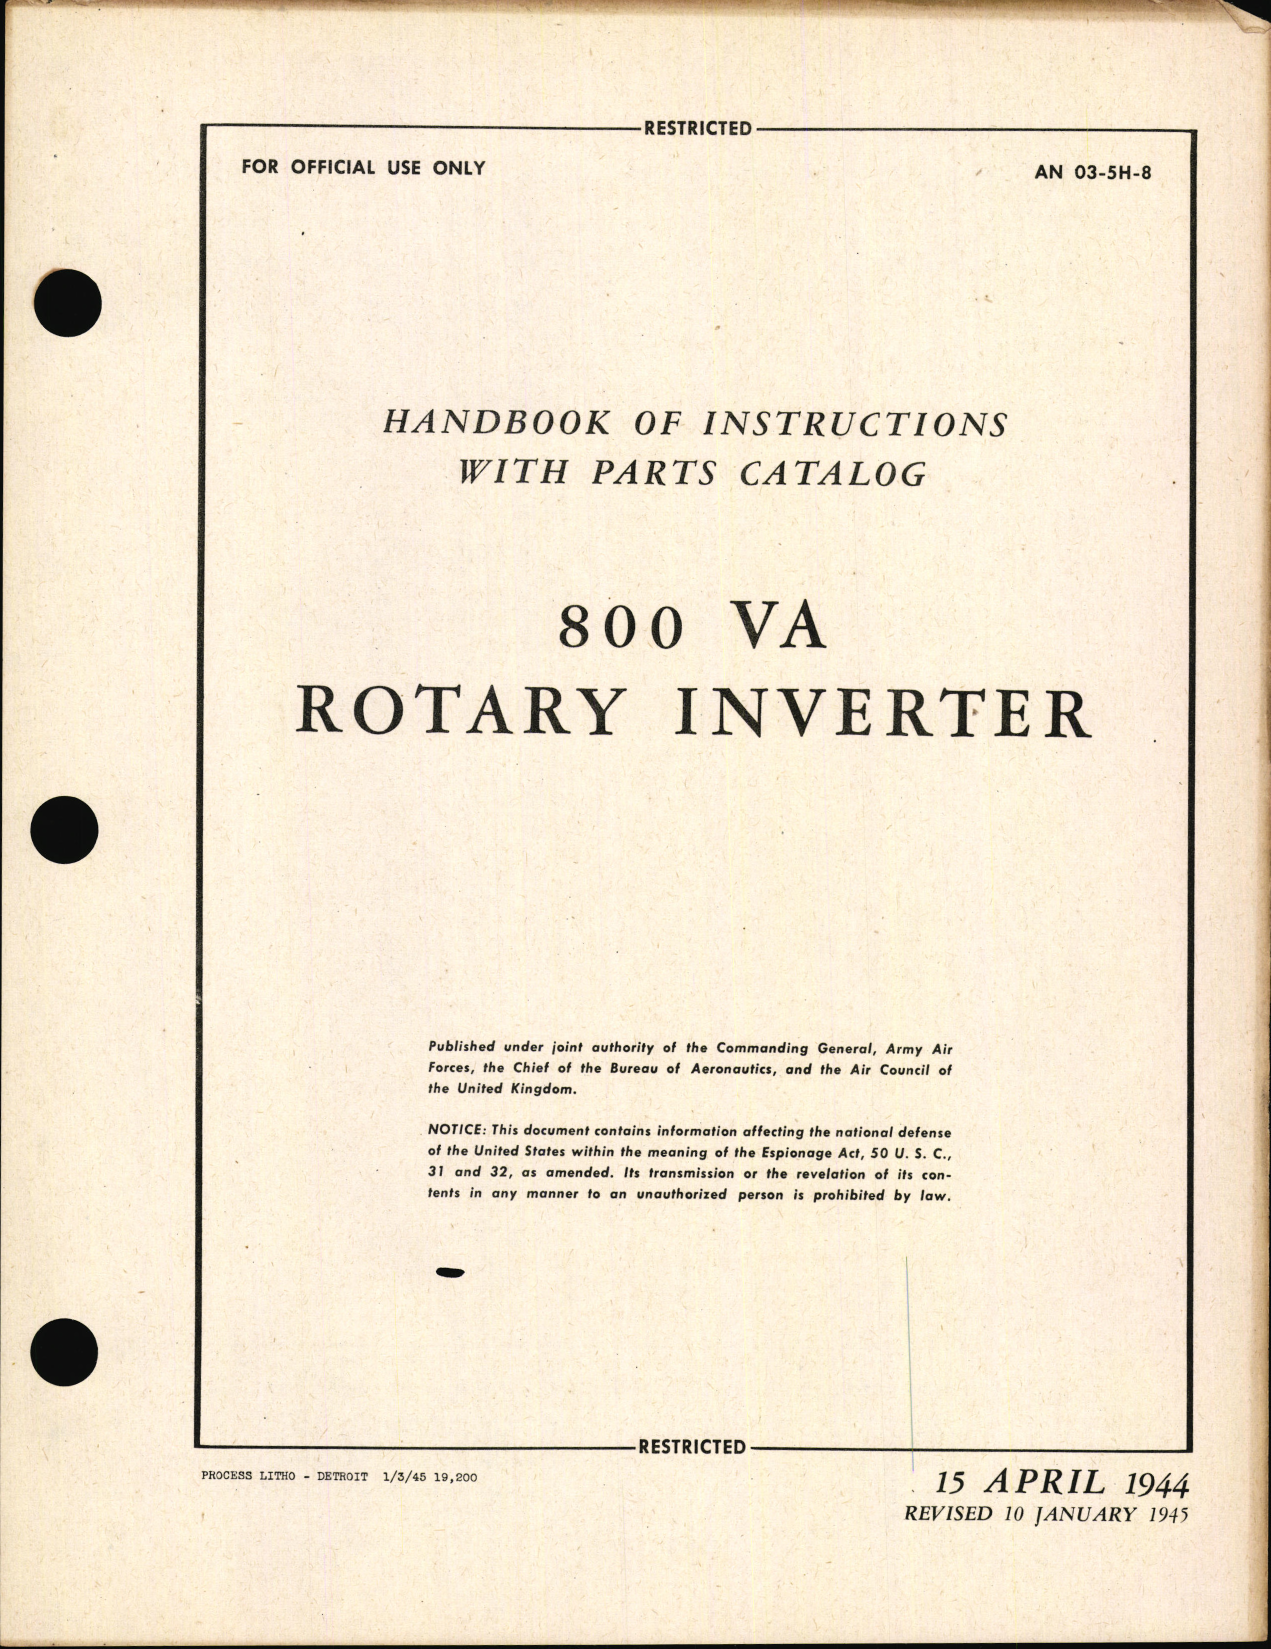 Sample page 1 from AirCorps Library document: Handbook of Instructions with Parts Catalog for 800 VA Rotary Inverter